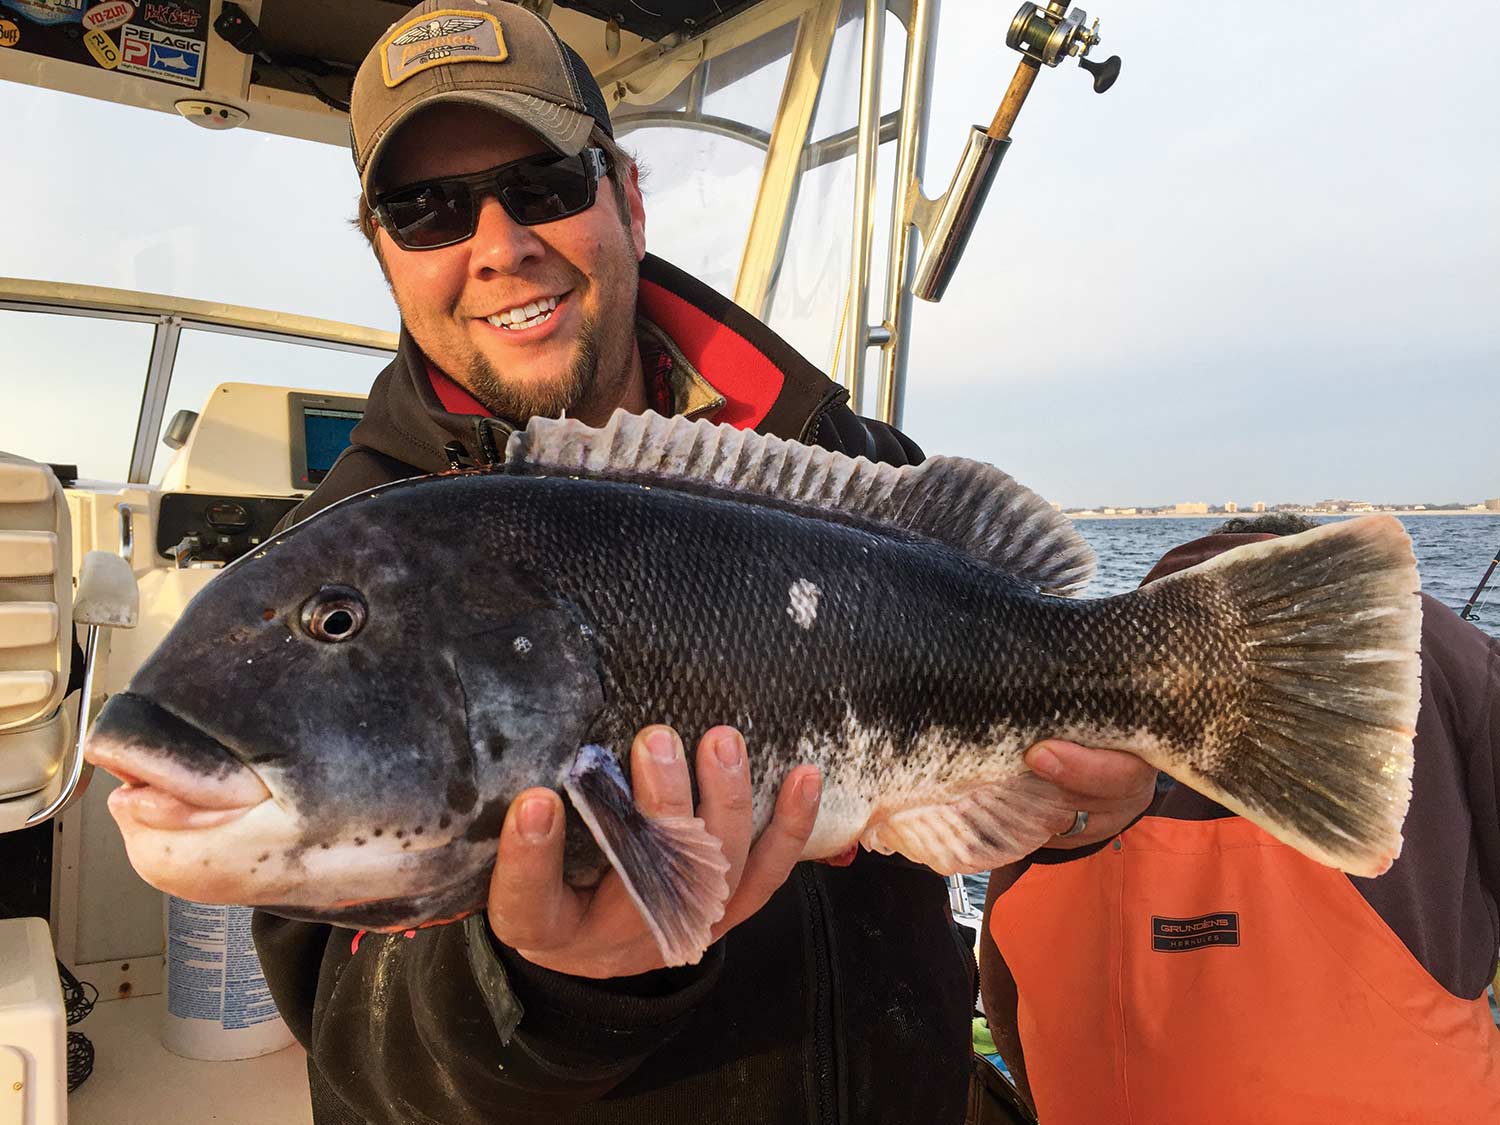 Catch Tautog (aka Blackfish) on the Coldest Days of Winter